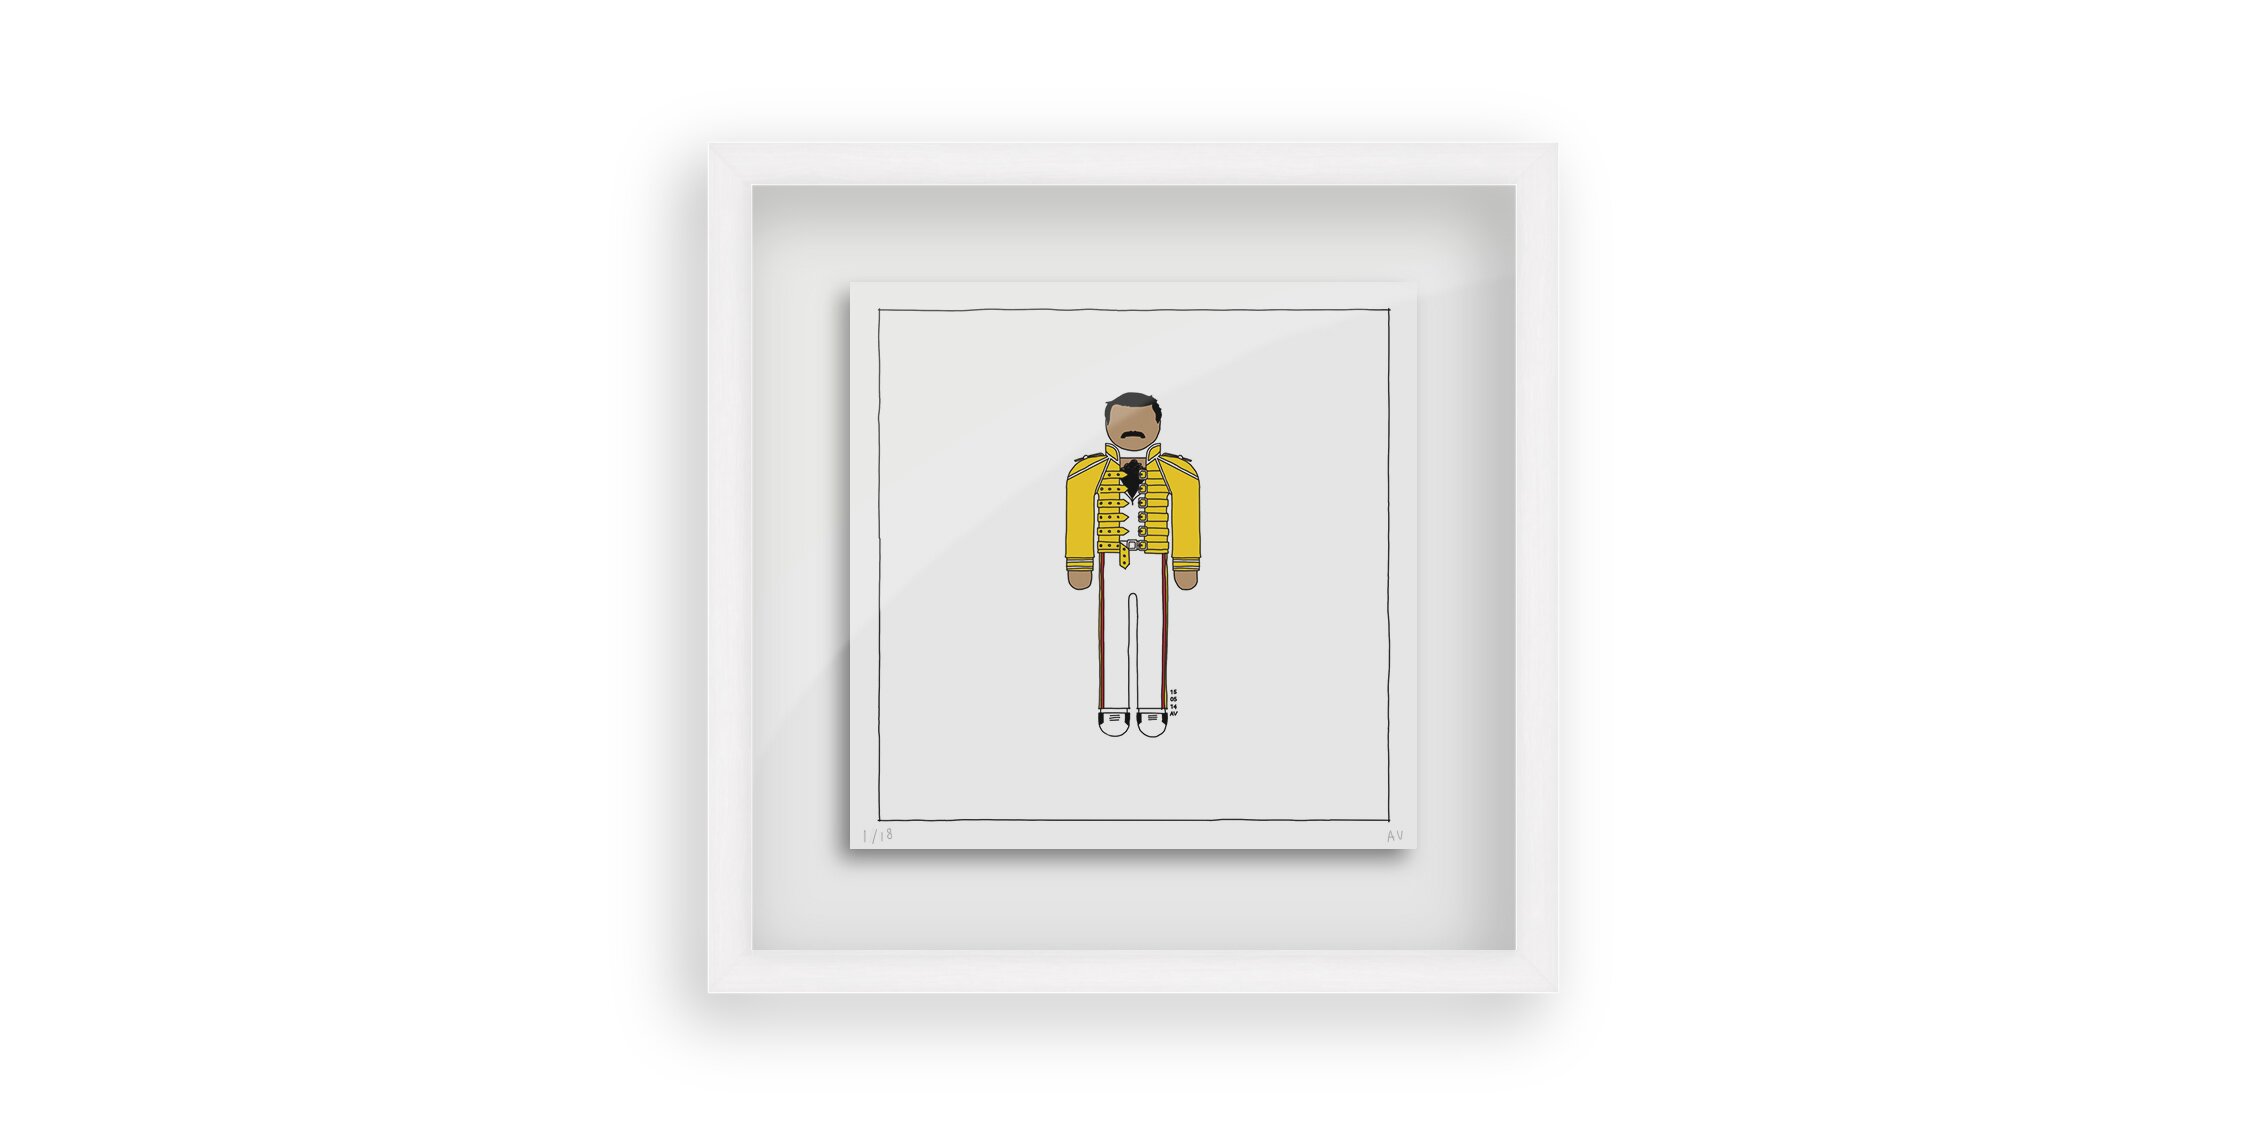 Freddie Mercury in Yellow - Persona Art Project (Ant Vervoort Hand Drawing)